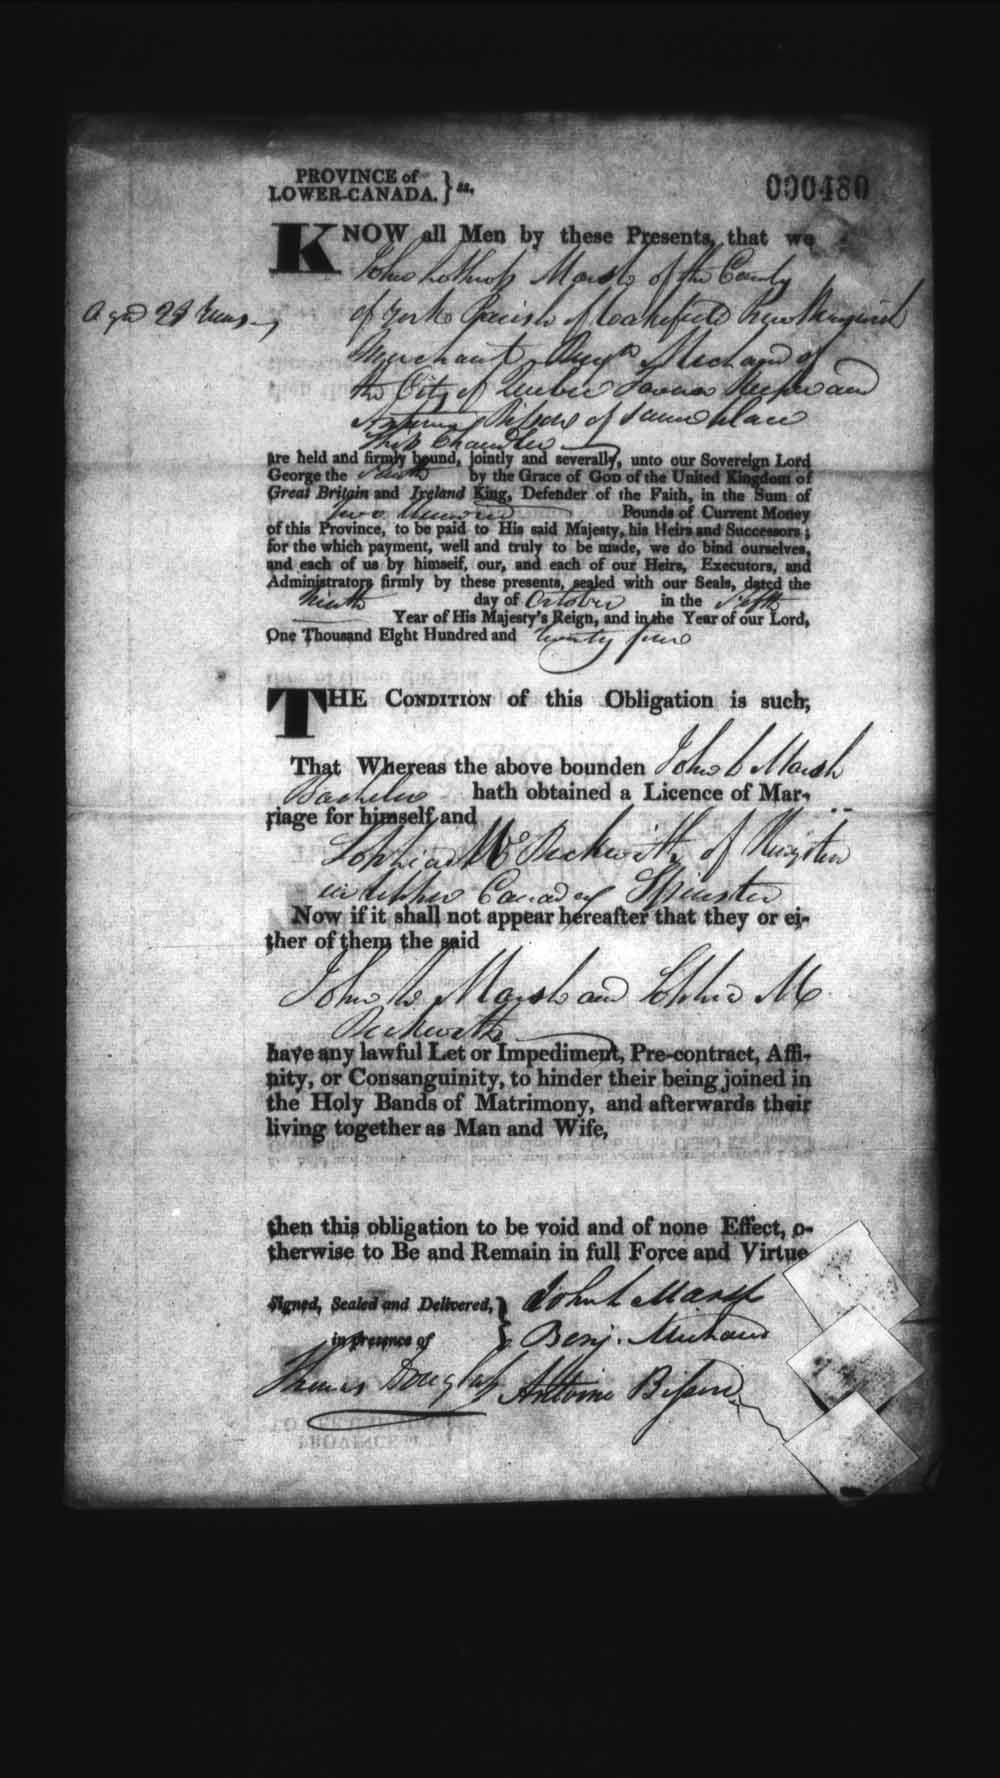 Digitized page of Upper and Lower Canada Marriage Bonds (1779-1865) for Image No.: e008236391